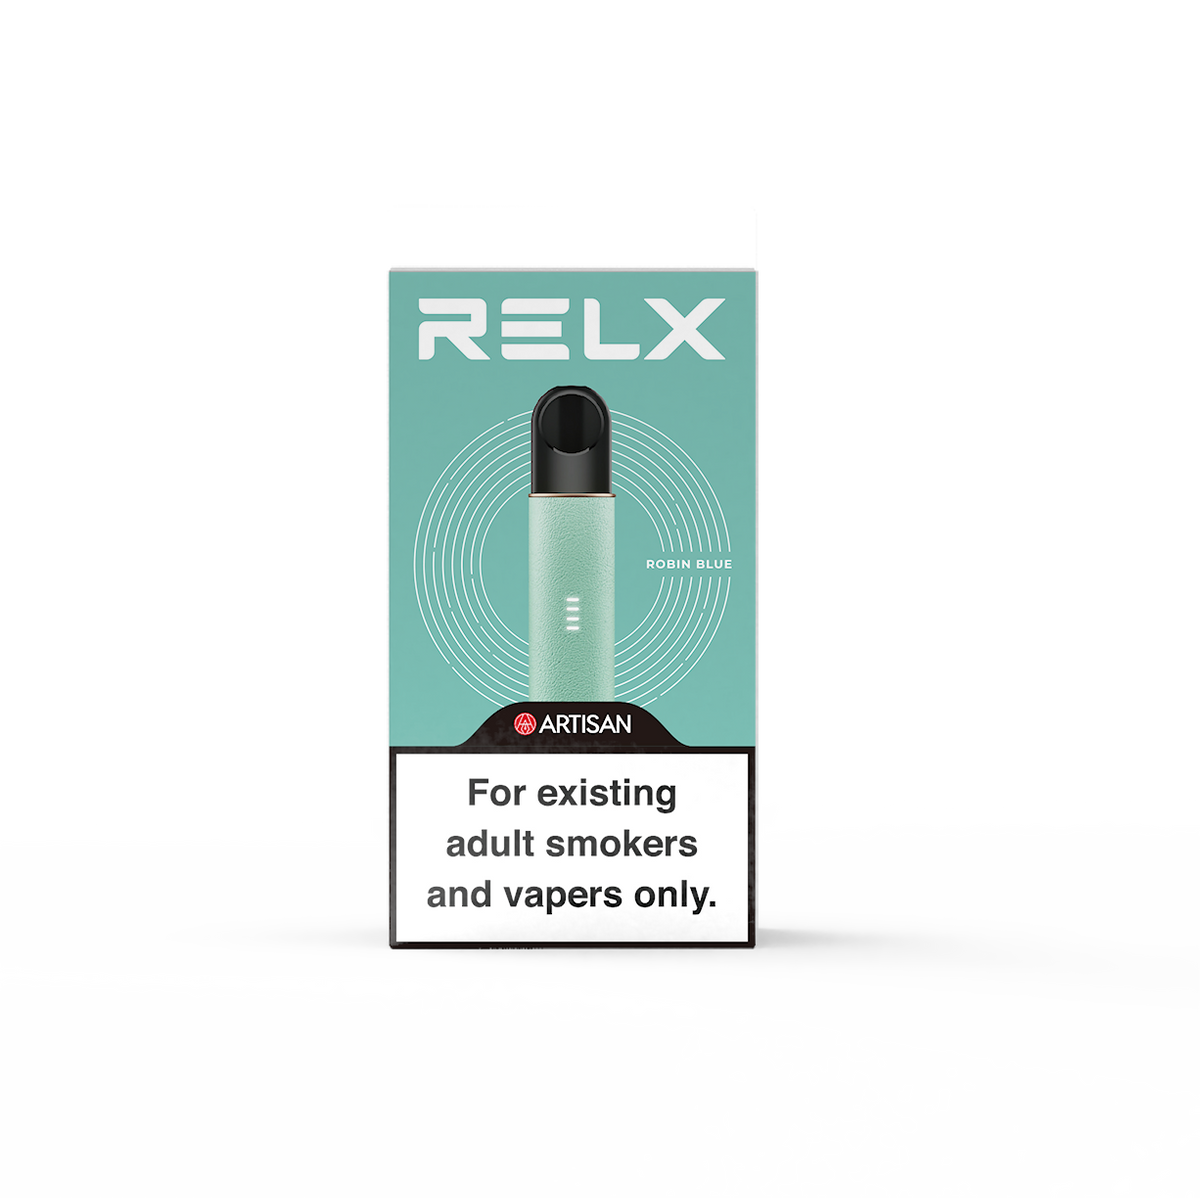 RELX Artisan Robin Blue Device Packaging - the Premium Vaping Experience